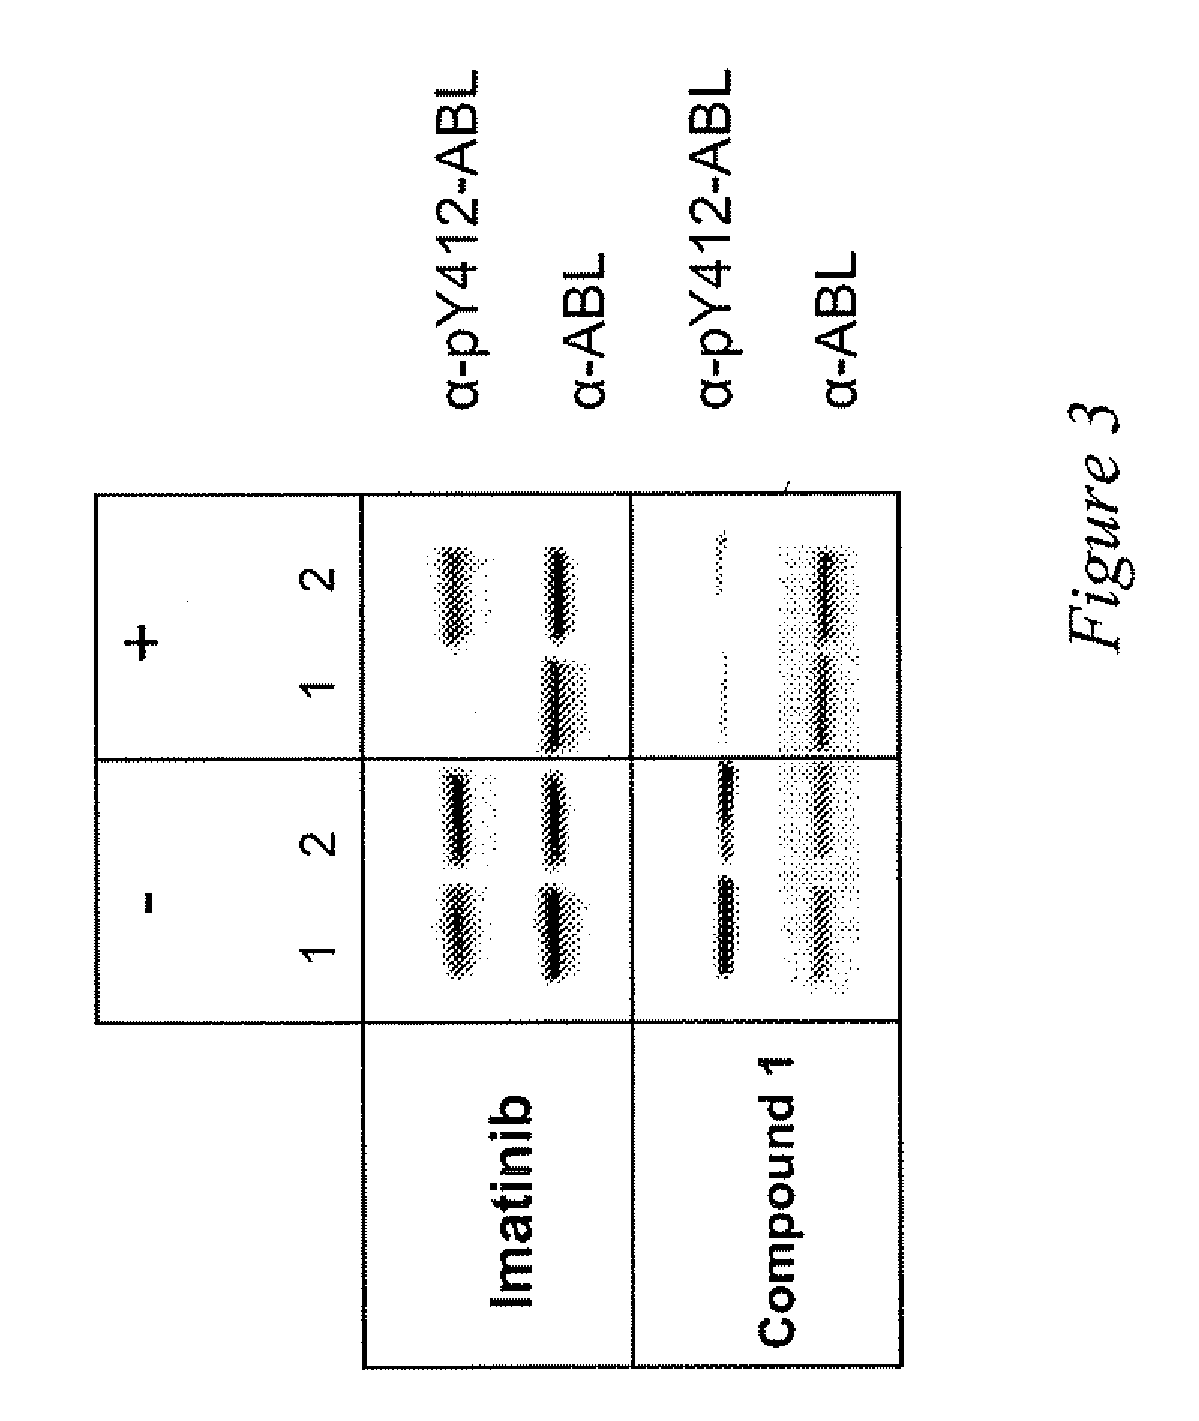 Use of a kinase inhibitor for the treatment of particular resistant tumors